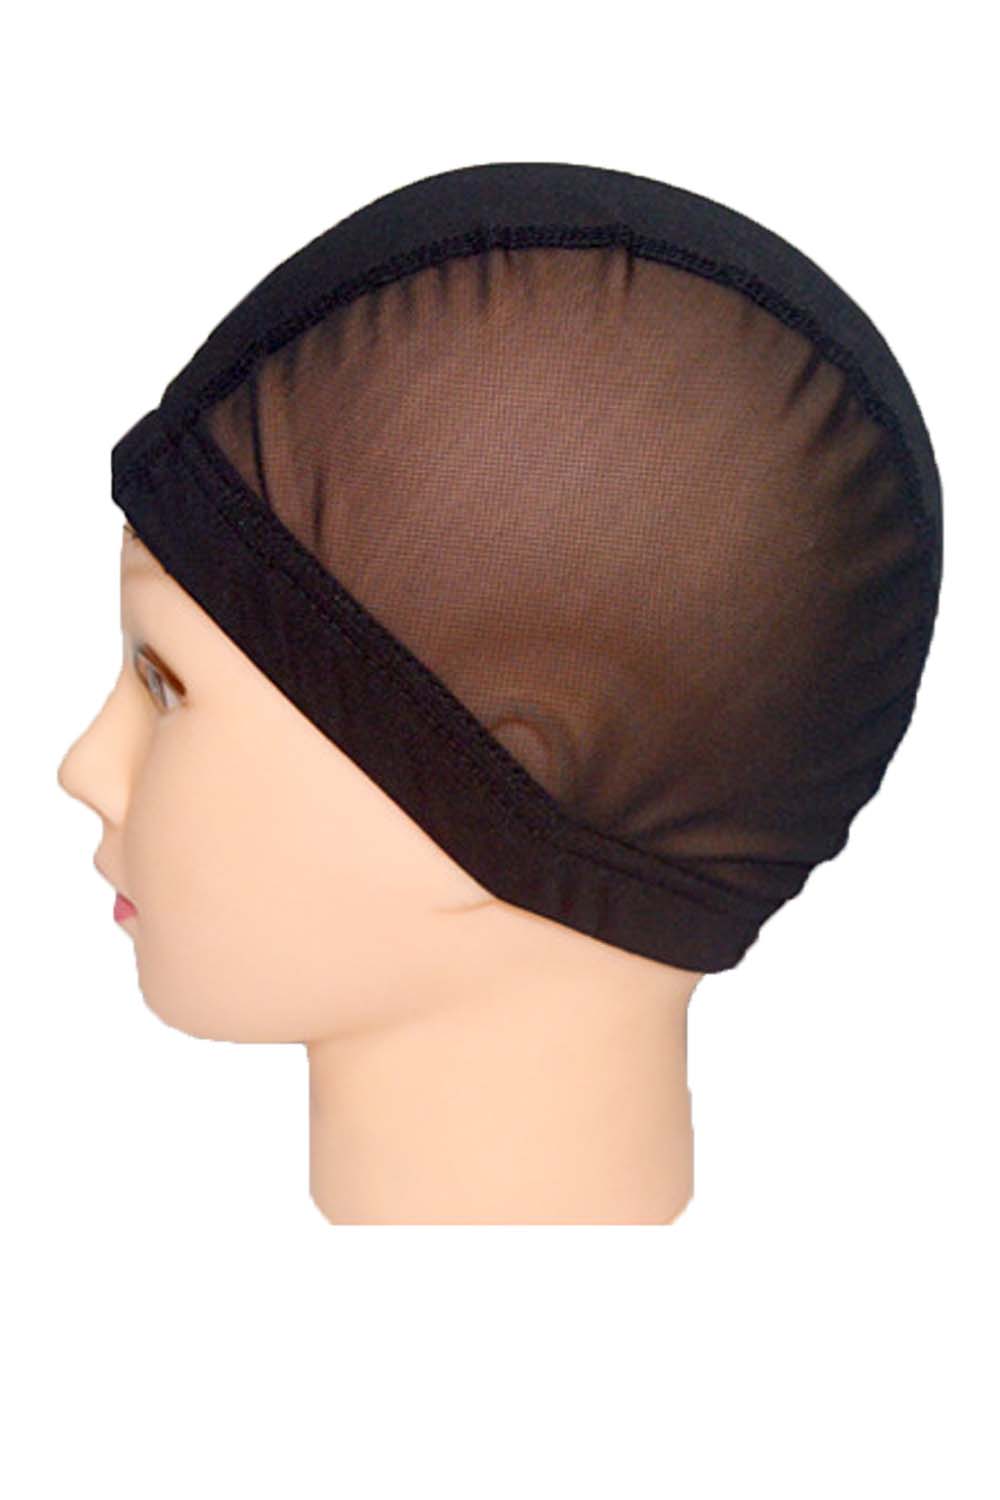    thin-black-ventilated-dome-cap-diy-making-your-own-wig